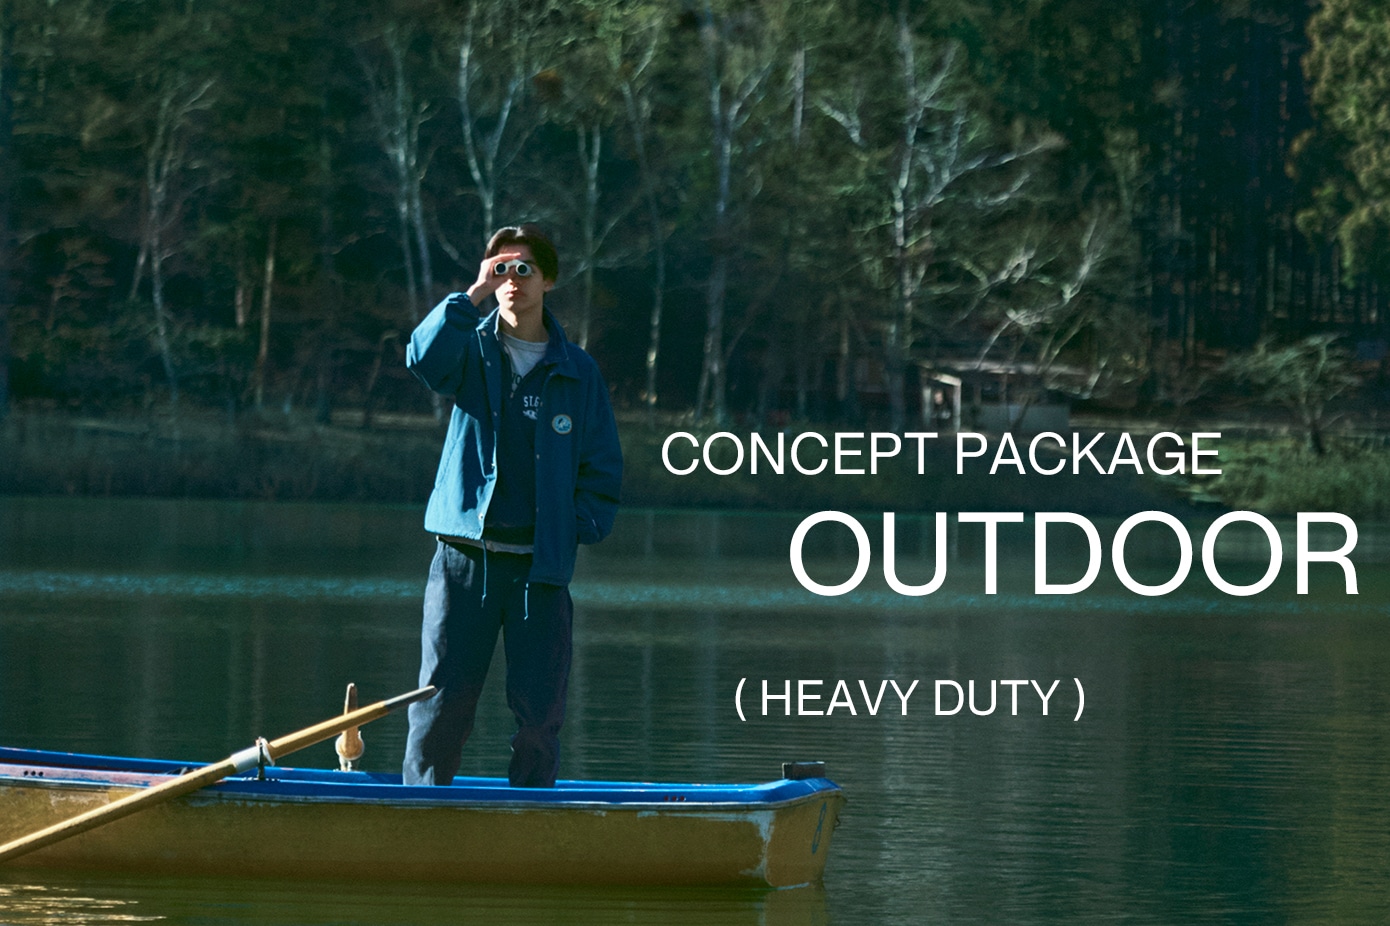 CONCEPT PACKAGE OUTDOOR (HEAVY DUTY)